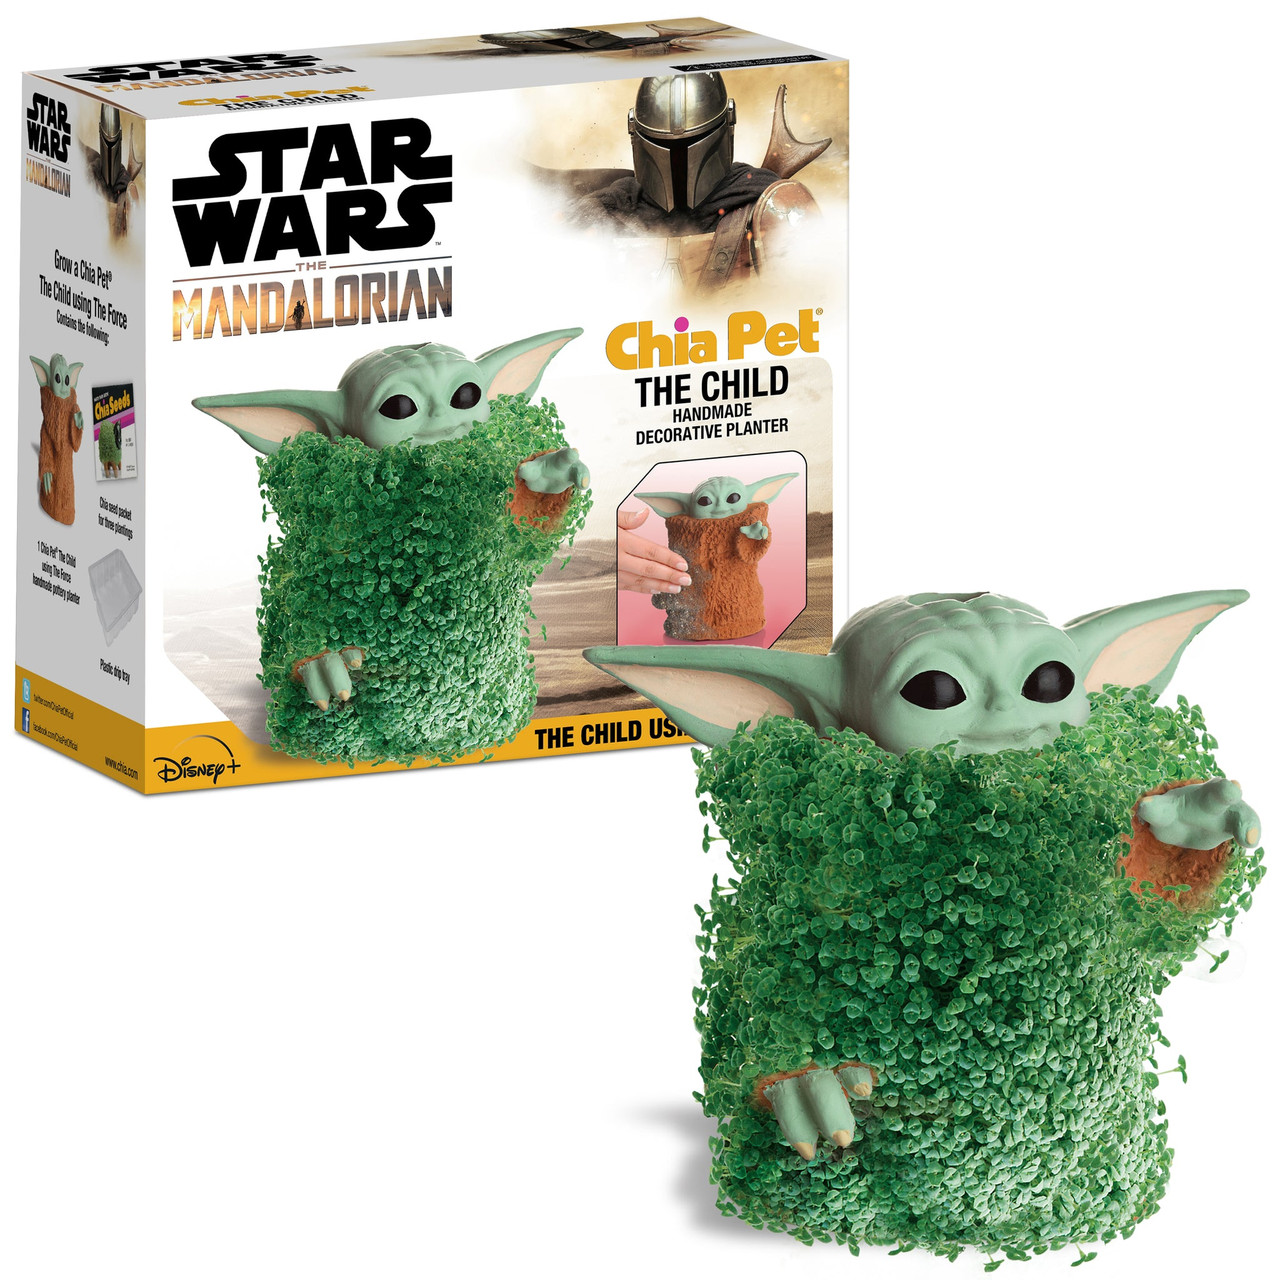 https://cdn11.bigcommerce.com/s-7jueb3py/images/stencil/1280x1280/products/4927/27876/NECA_Star_Wars_The_Mandalorian_Child_Using_the_Force_Chia_Pet_-_2__44144.1654976082.jpg?c=2